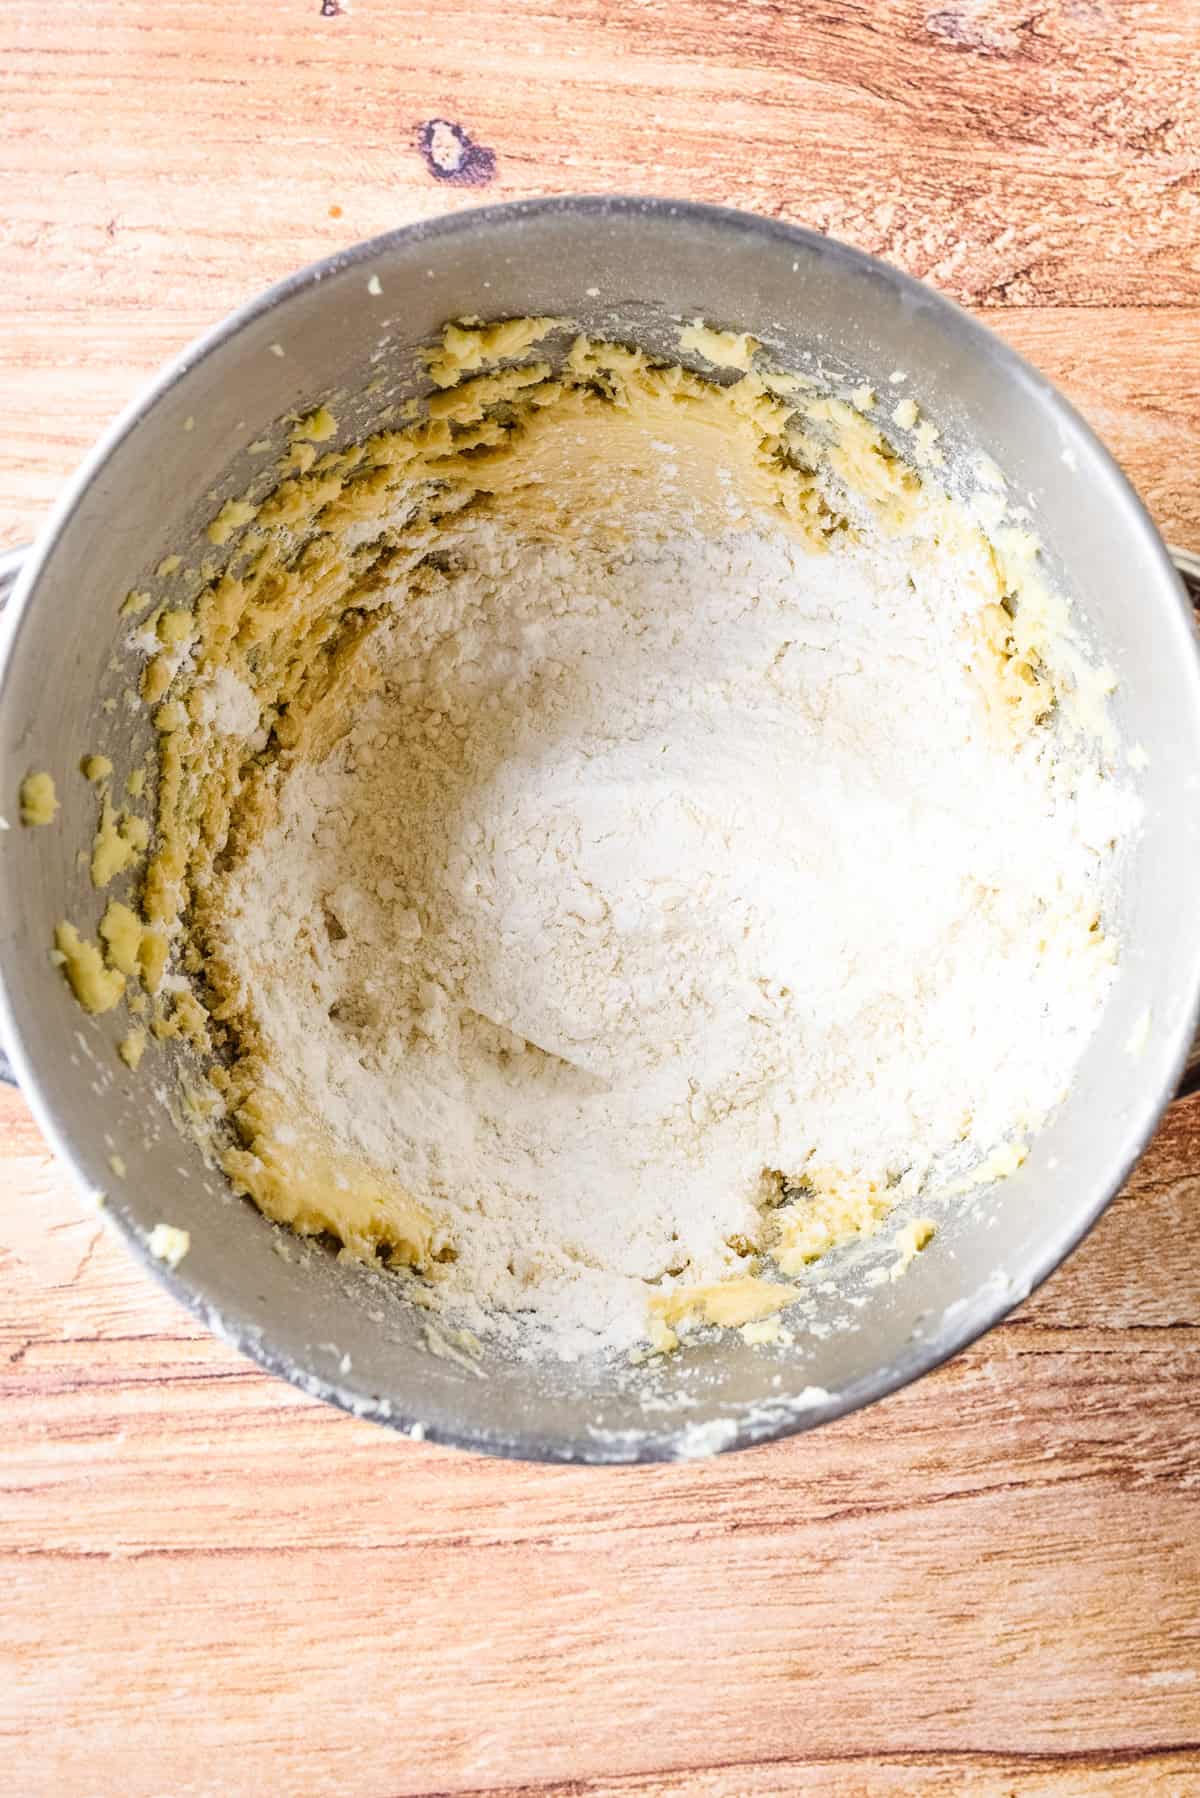 Overhead view of dry ingredients added to wet ingredients in mixing bowl.